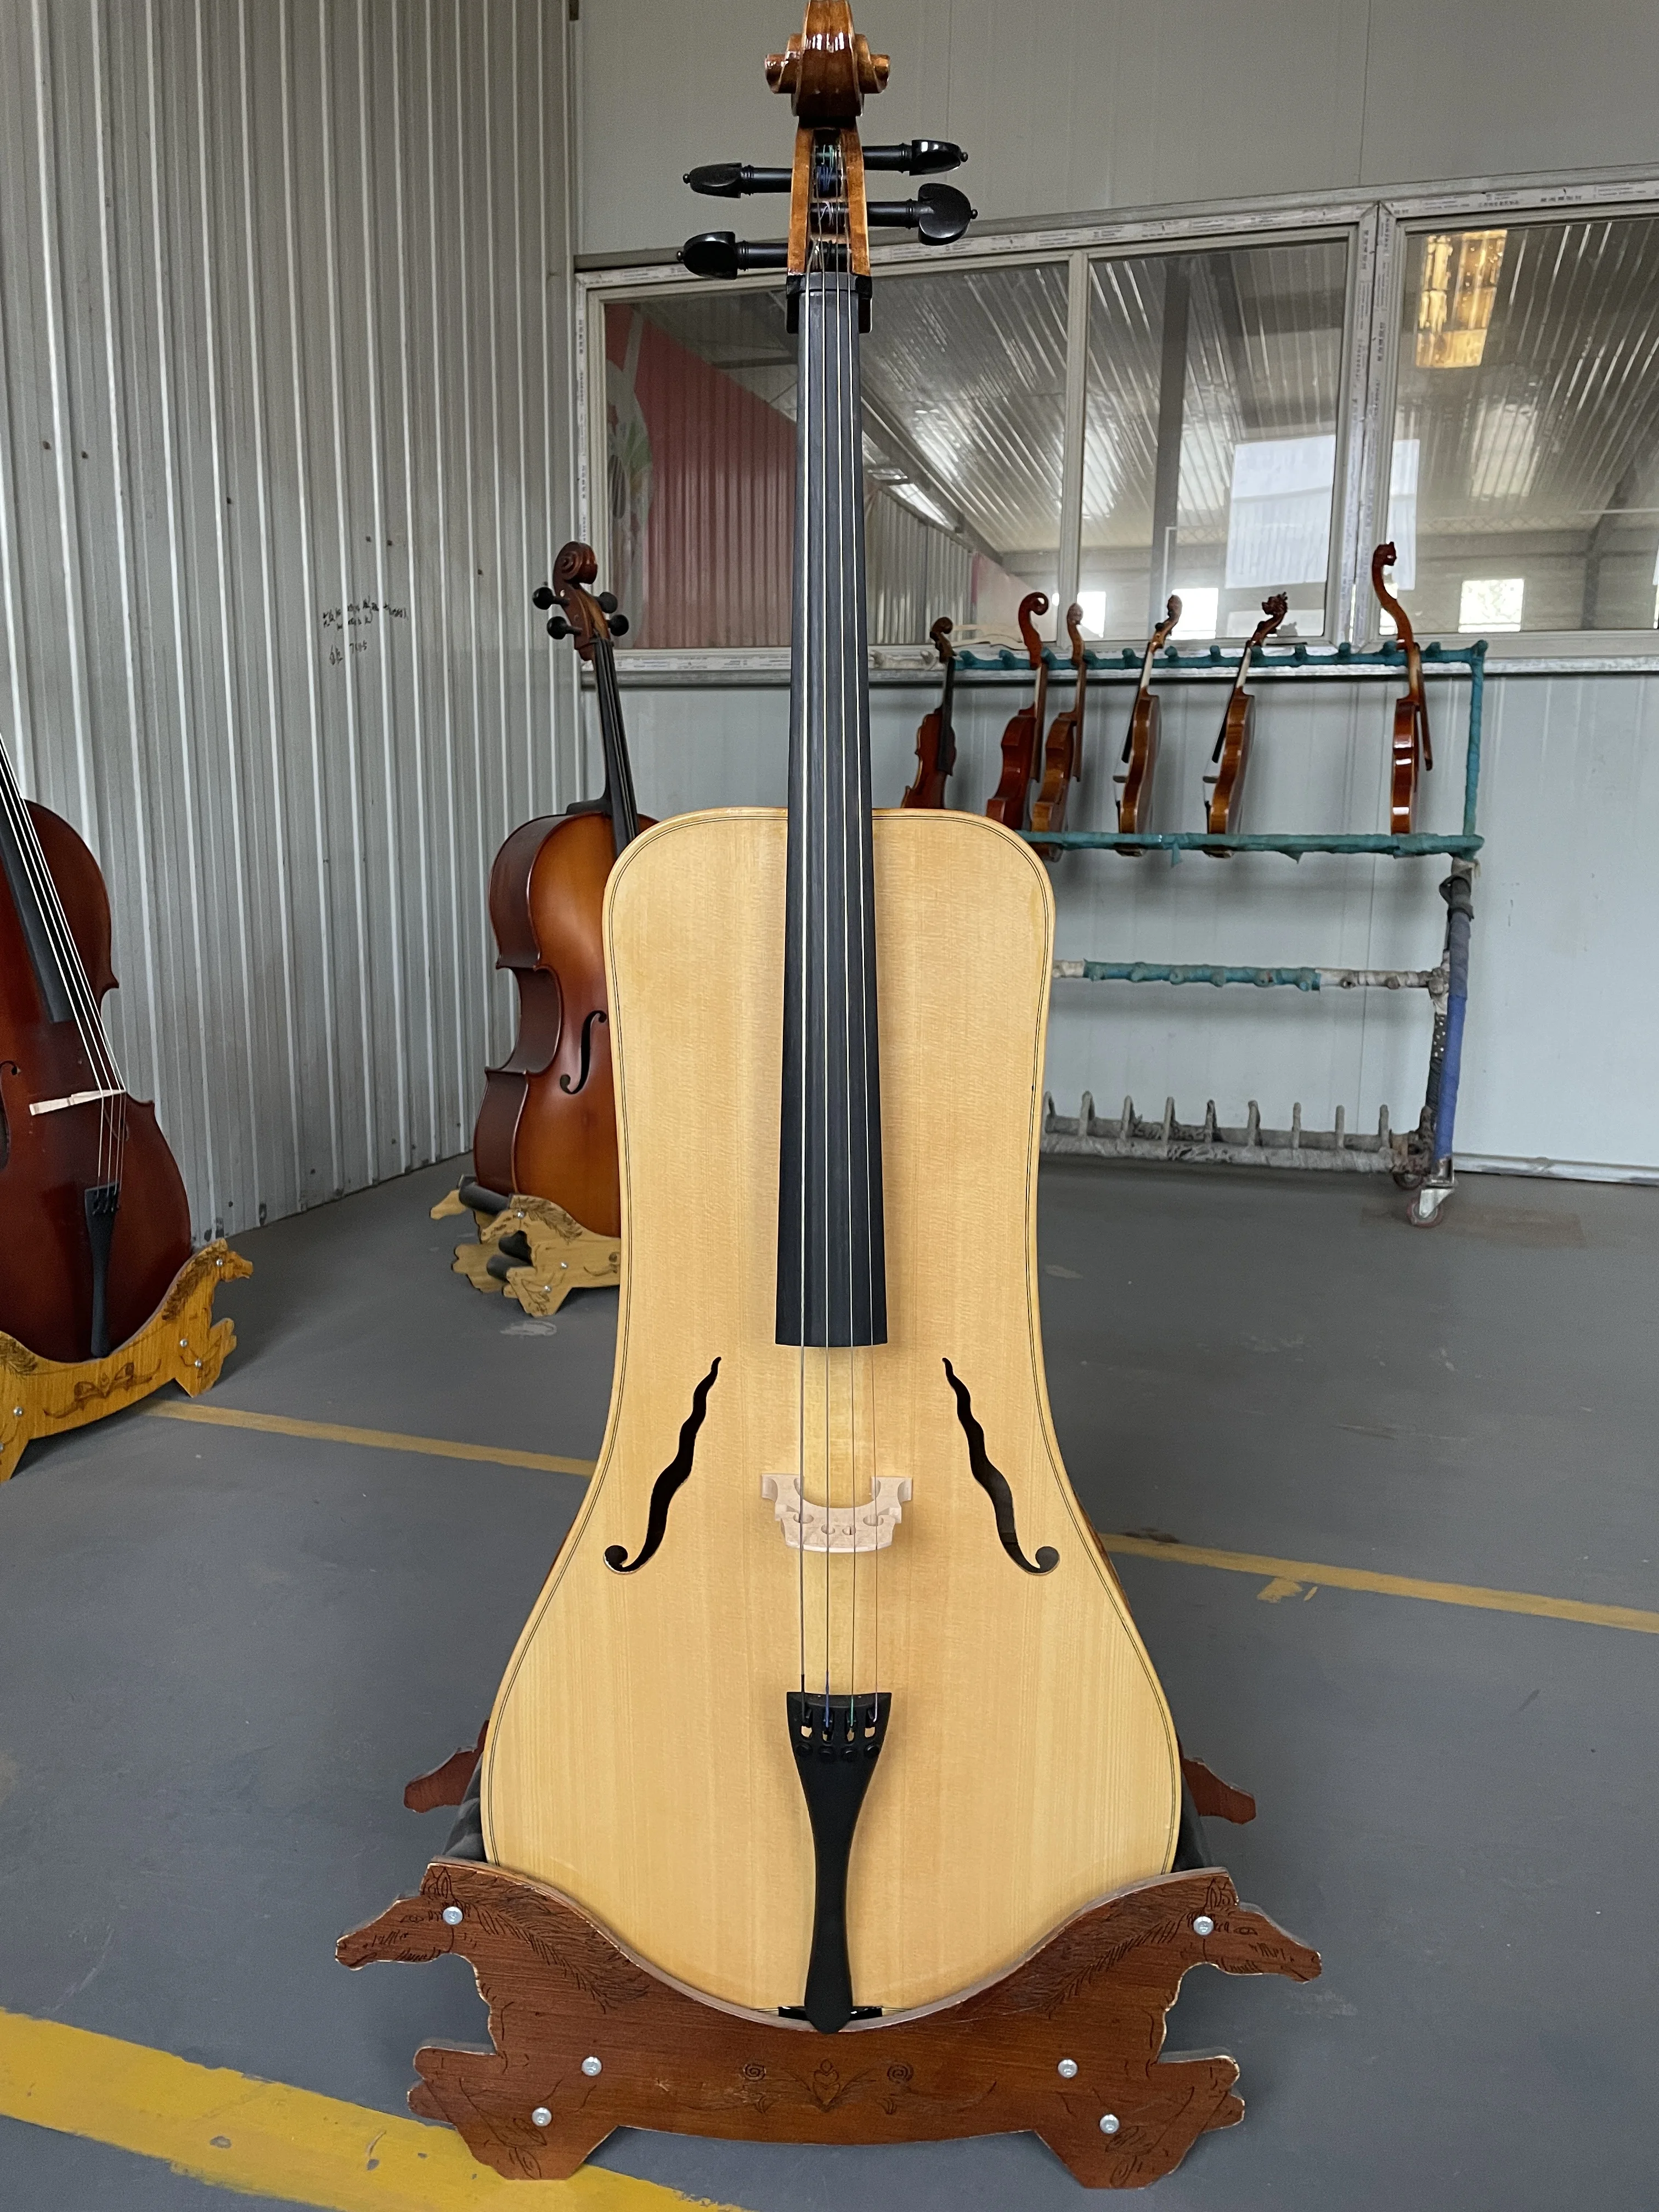 

Maple-shaped cello made of solid wood, with beautiful lines, for beginners to practice, tiger pattern, 4/4